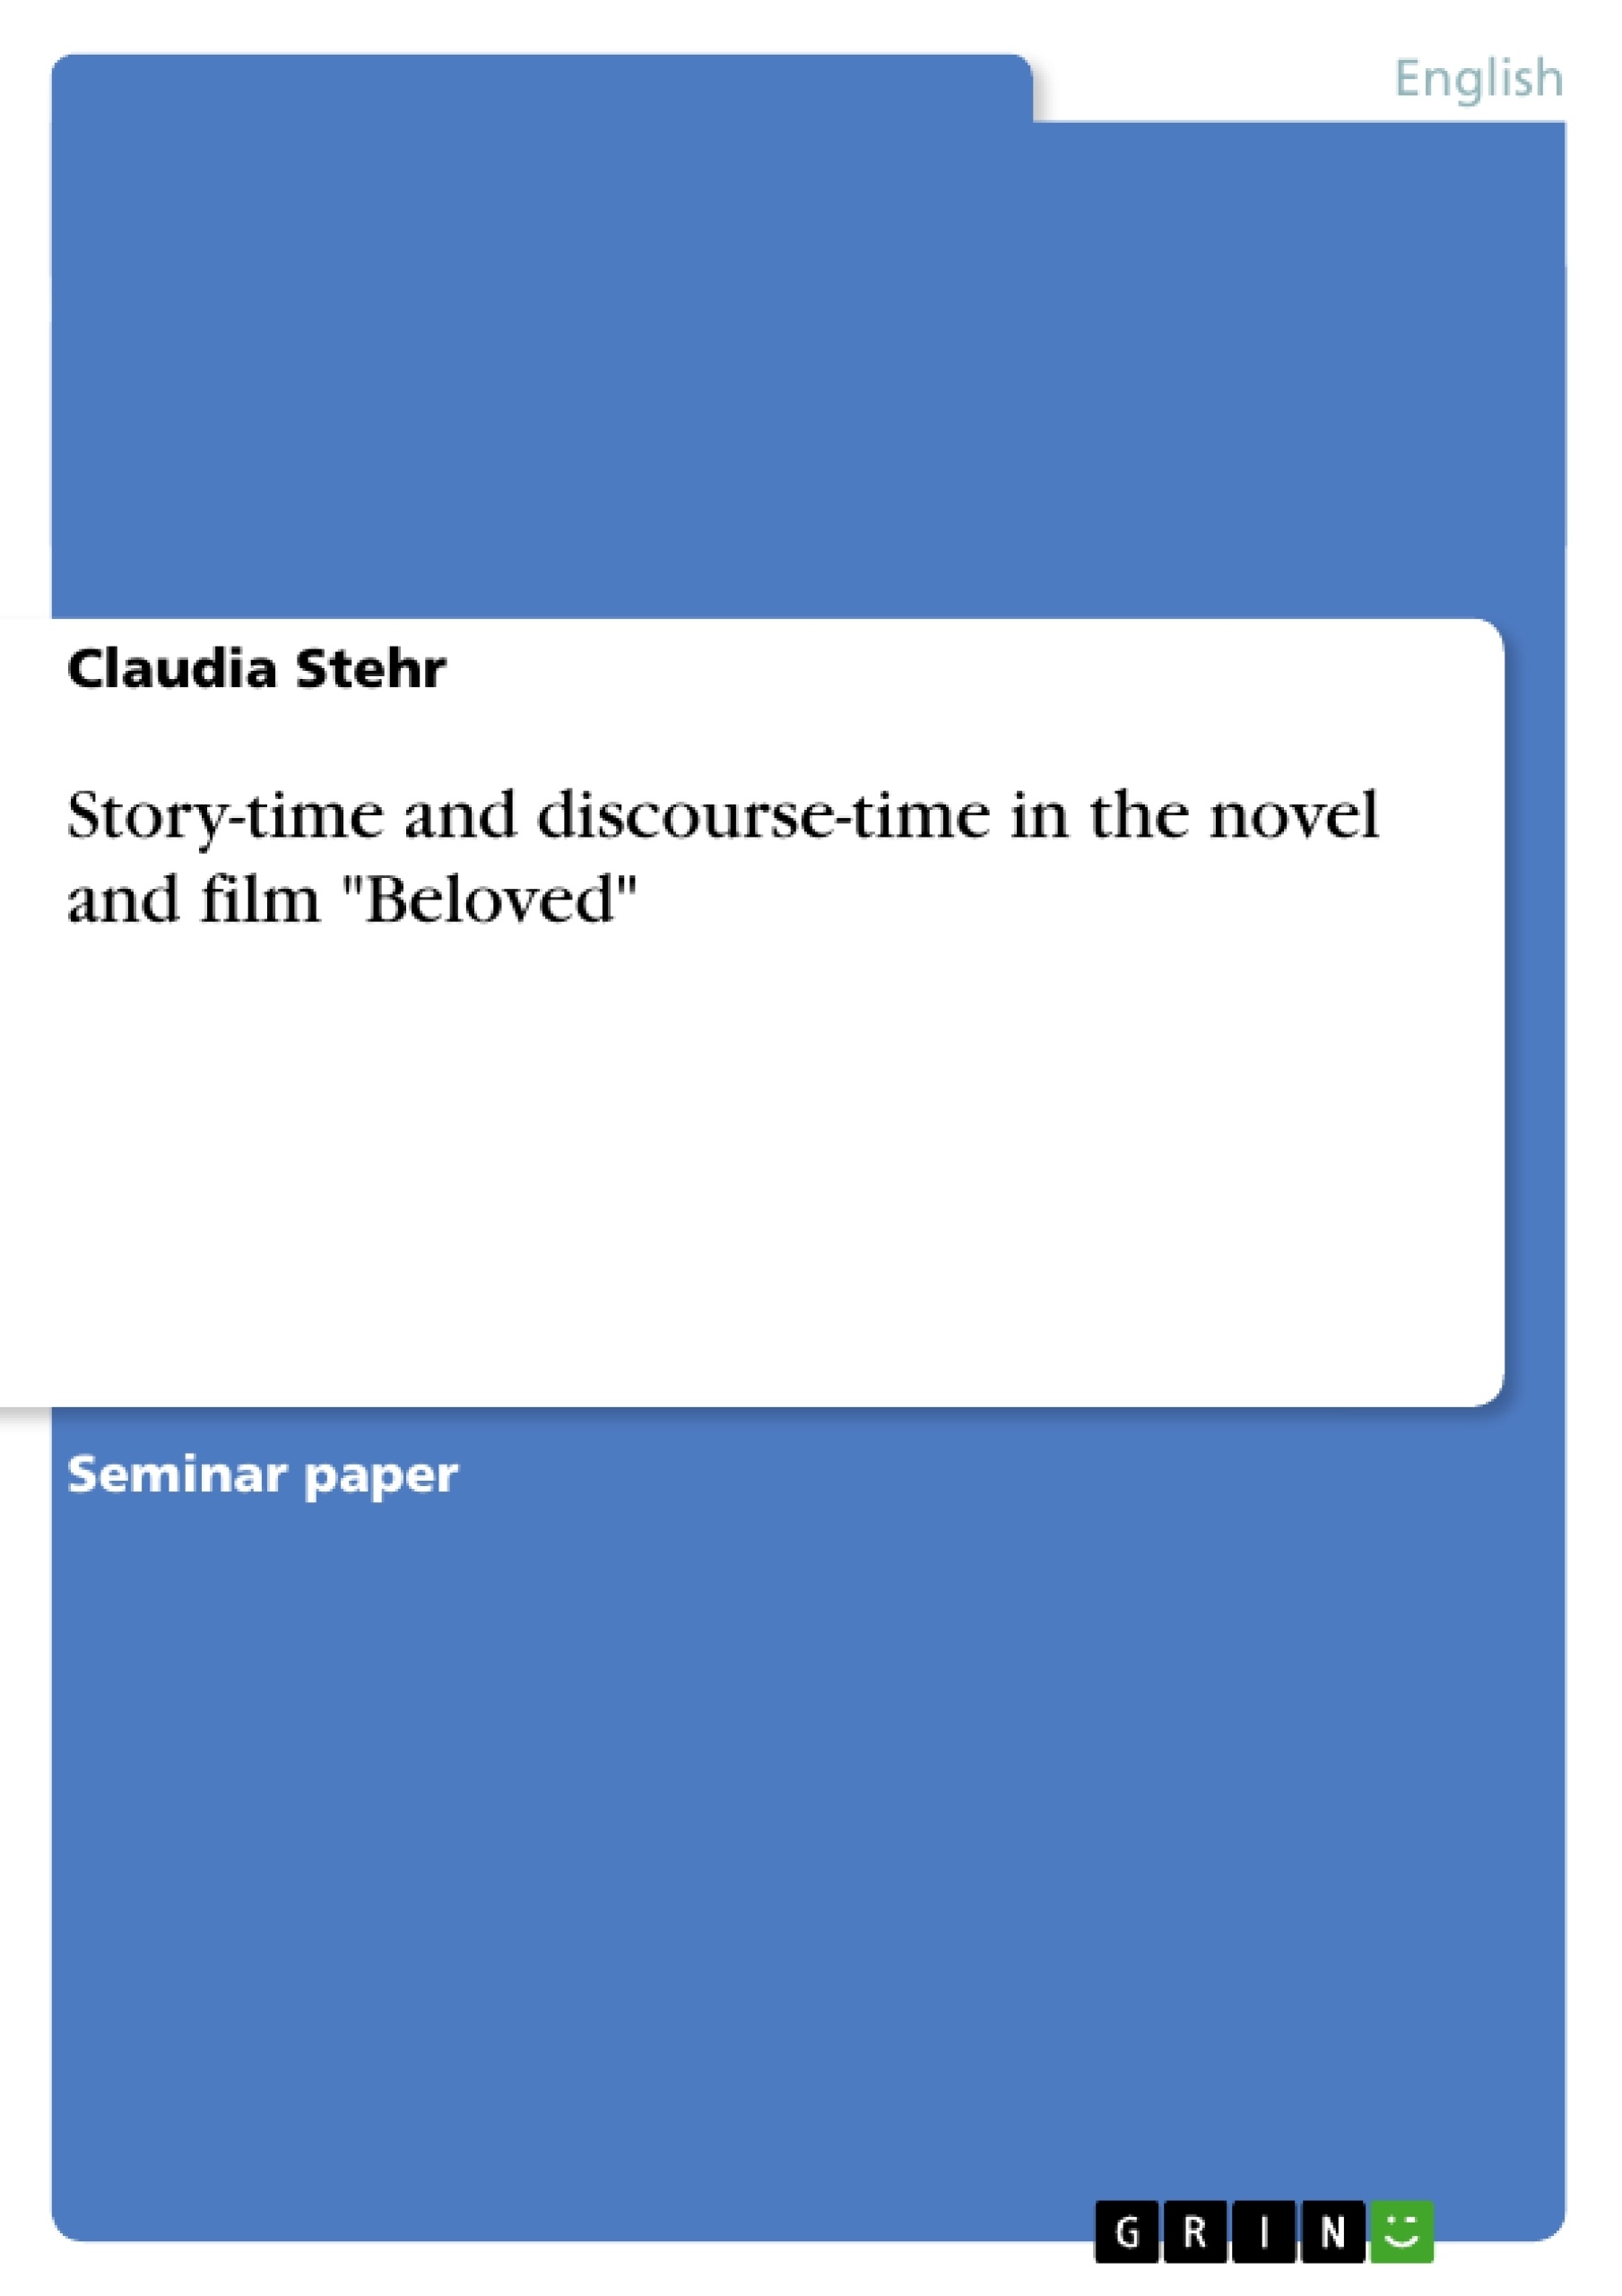 Titre: Story-time and discourse-time in the novel and film "Beloved"